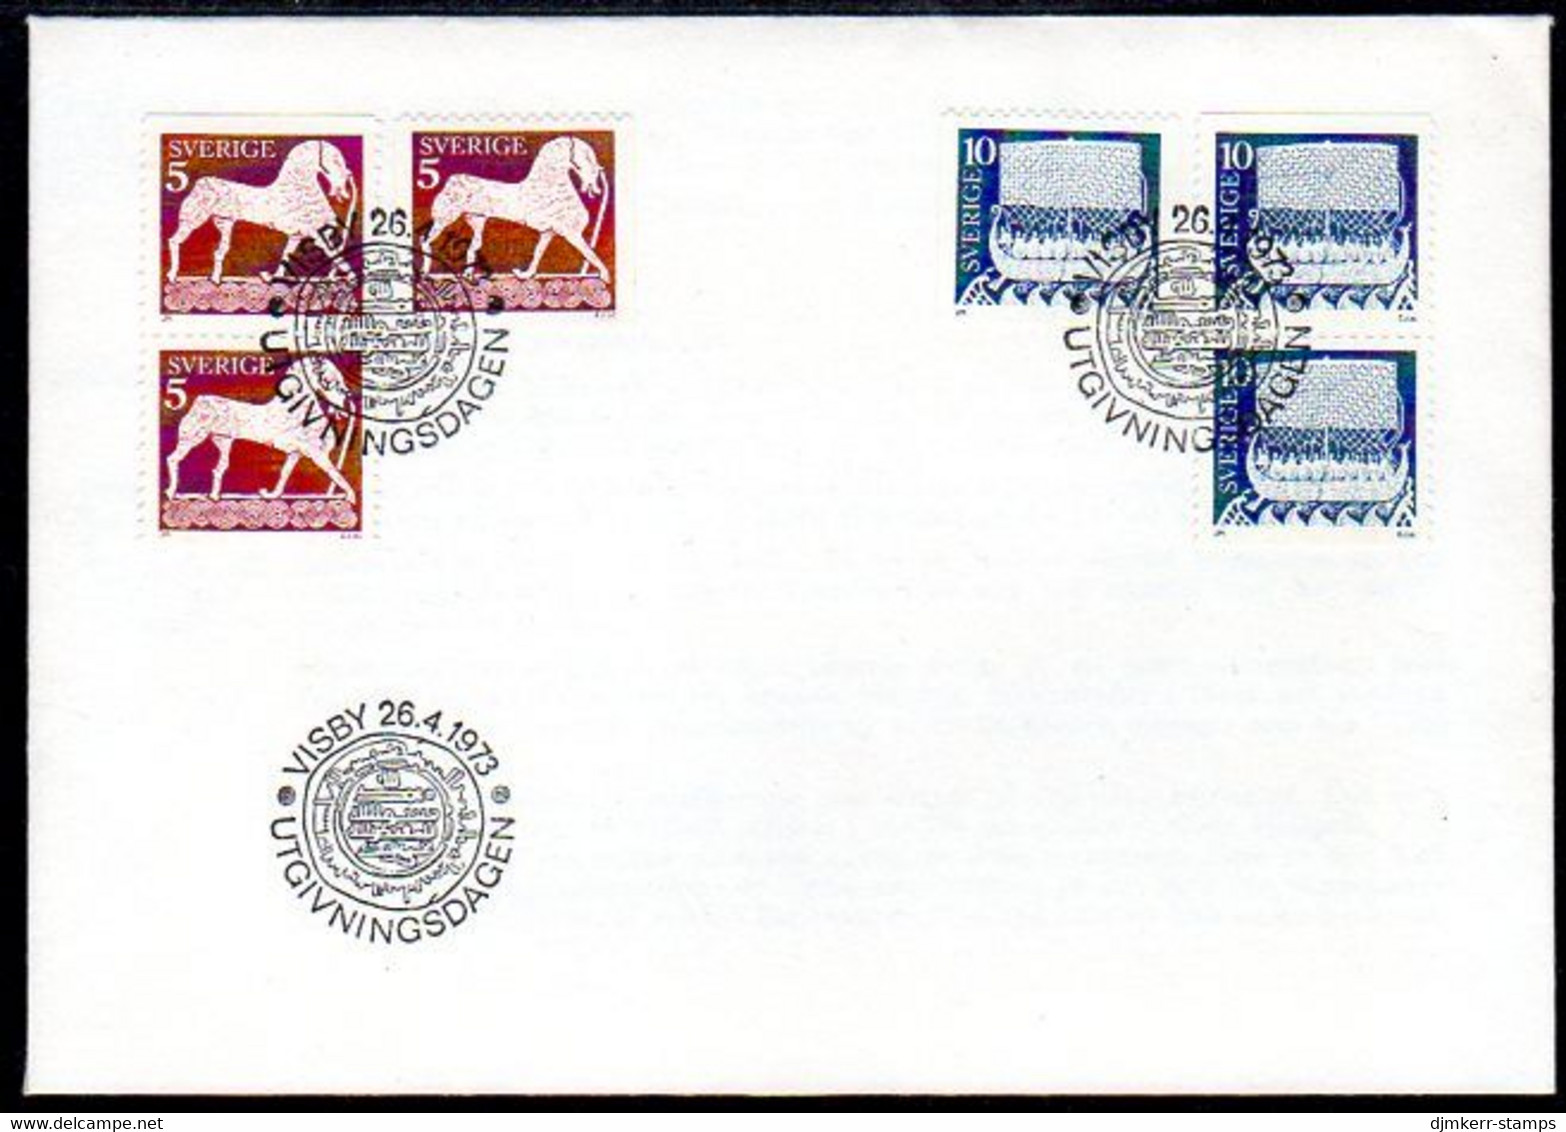 SWEDEN 1973 Definitive: Horse And Viking Ship  FDC.  Michel 799-800 - FDC